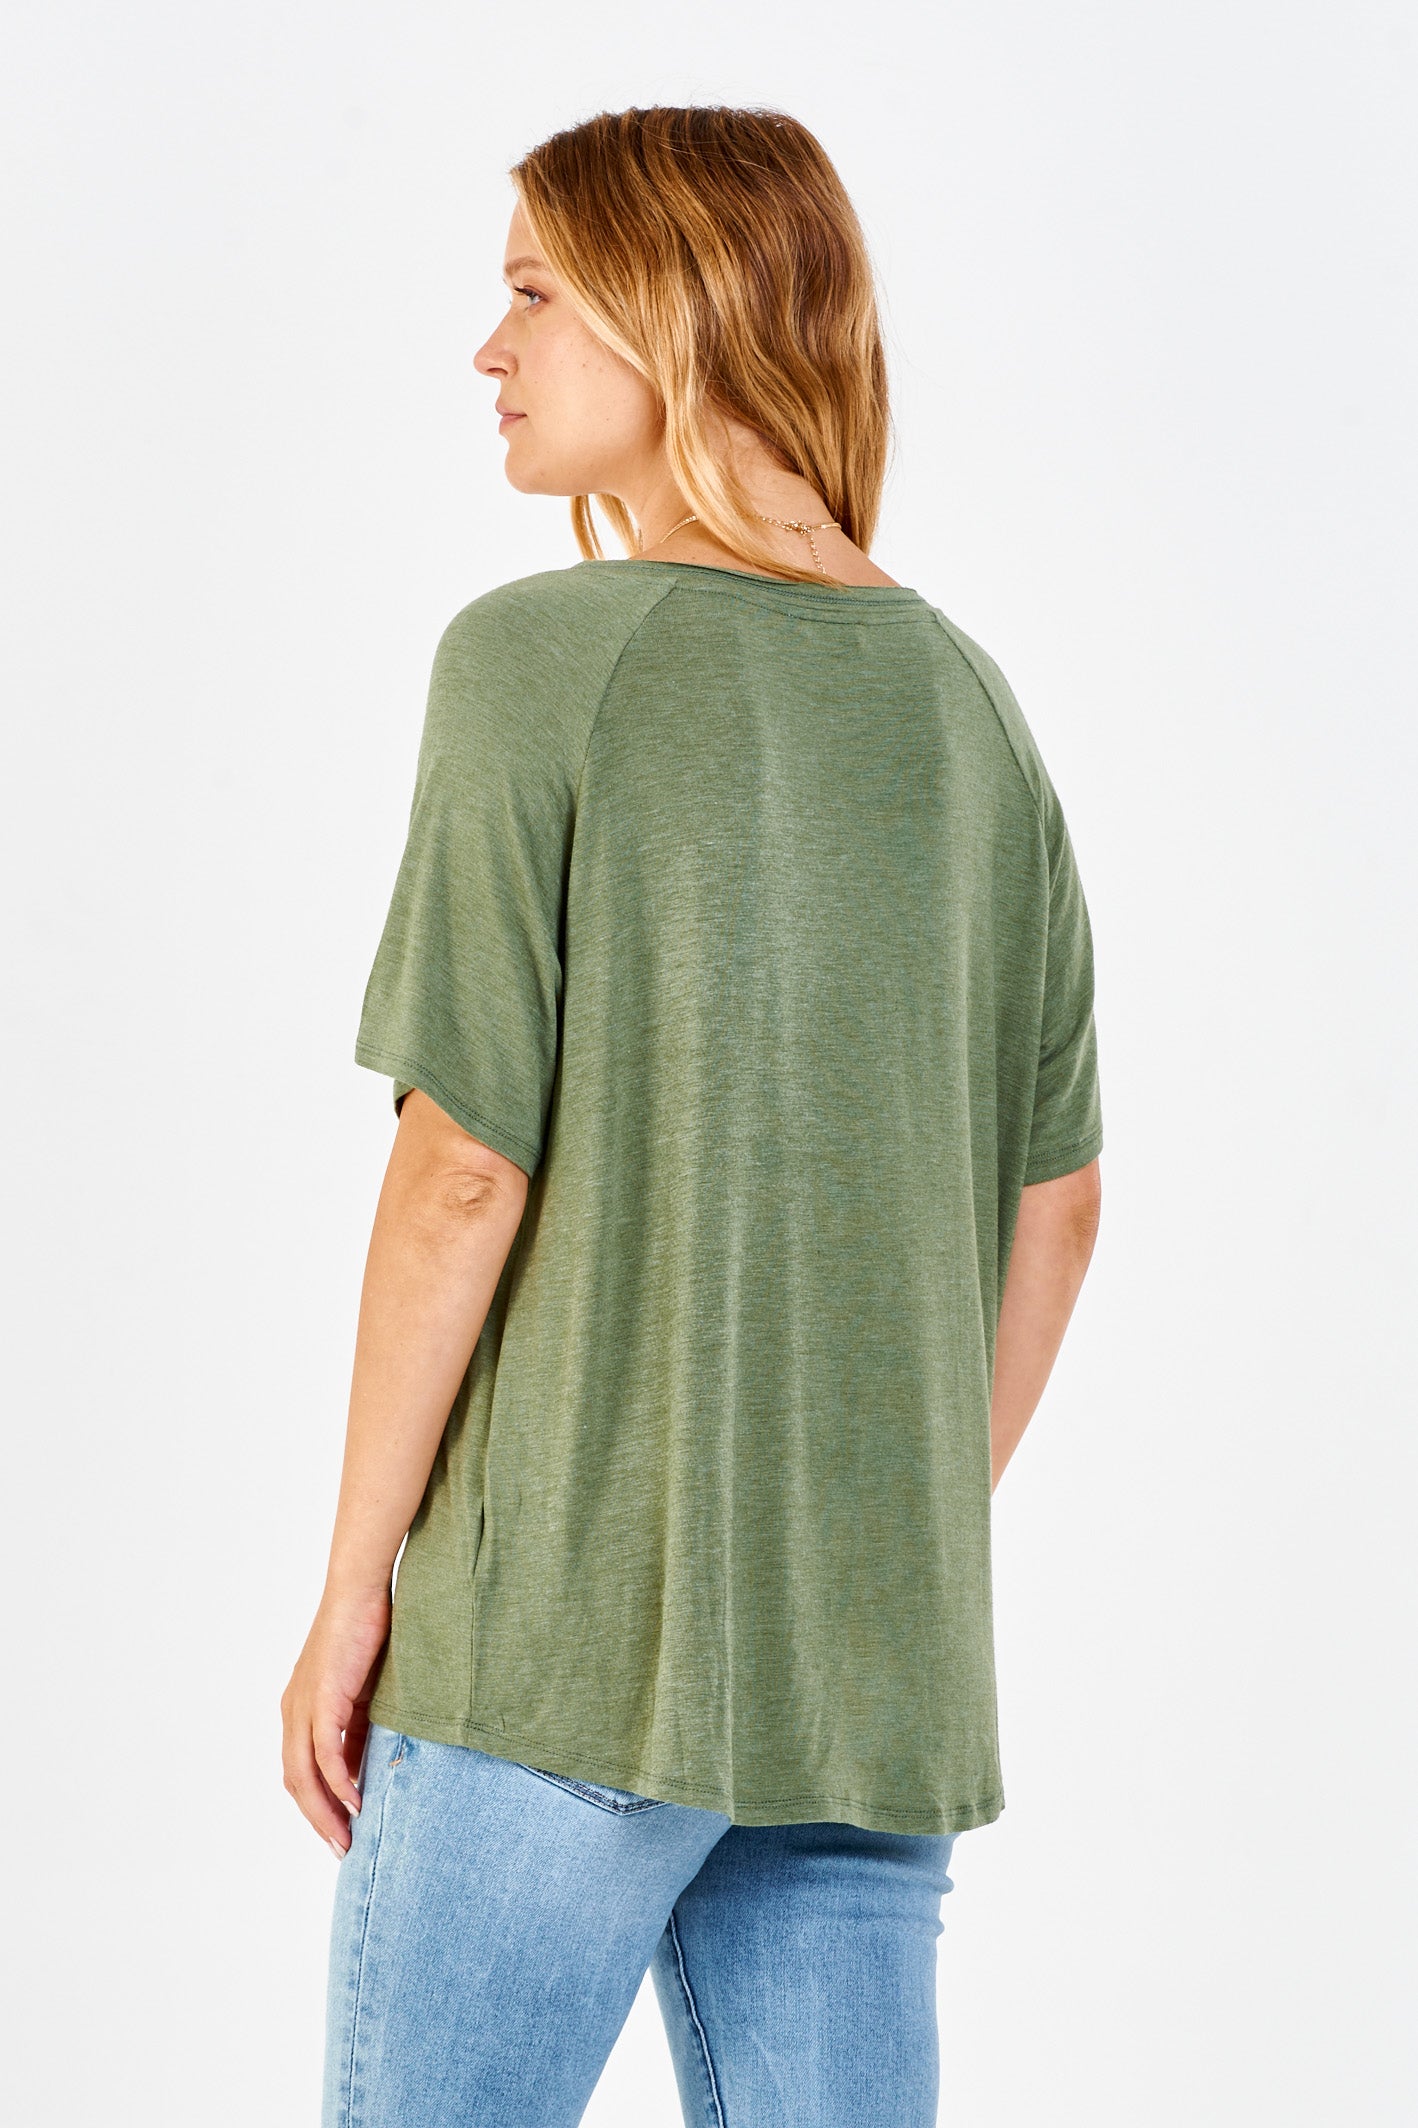 taylor-raglan-sleeve-top-olive-oil-back-image-another-love-clothing